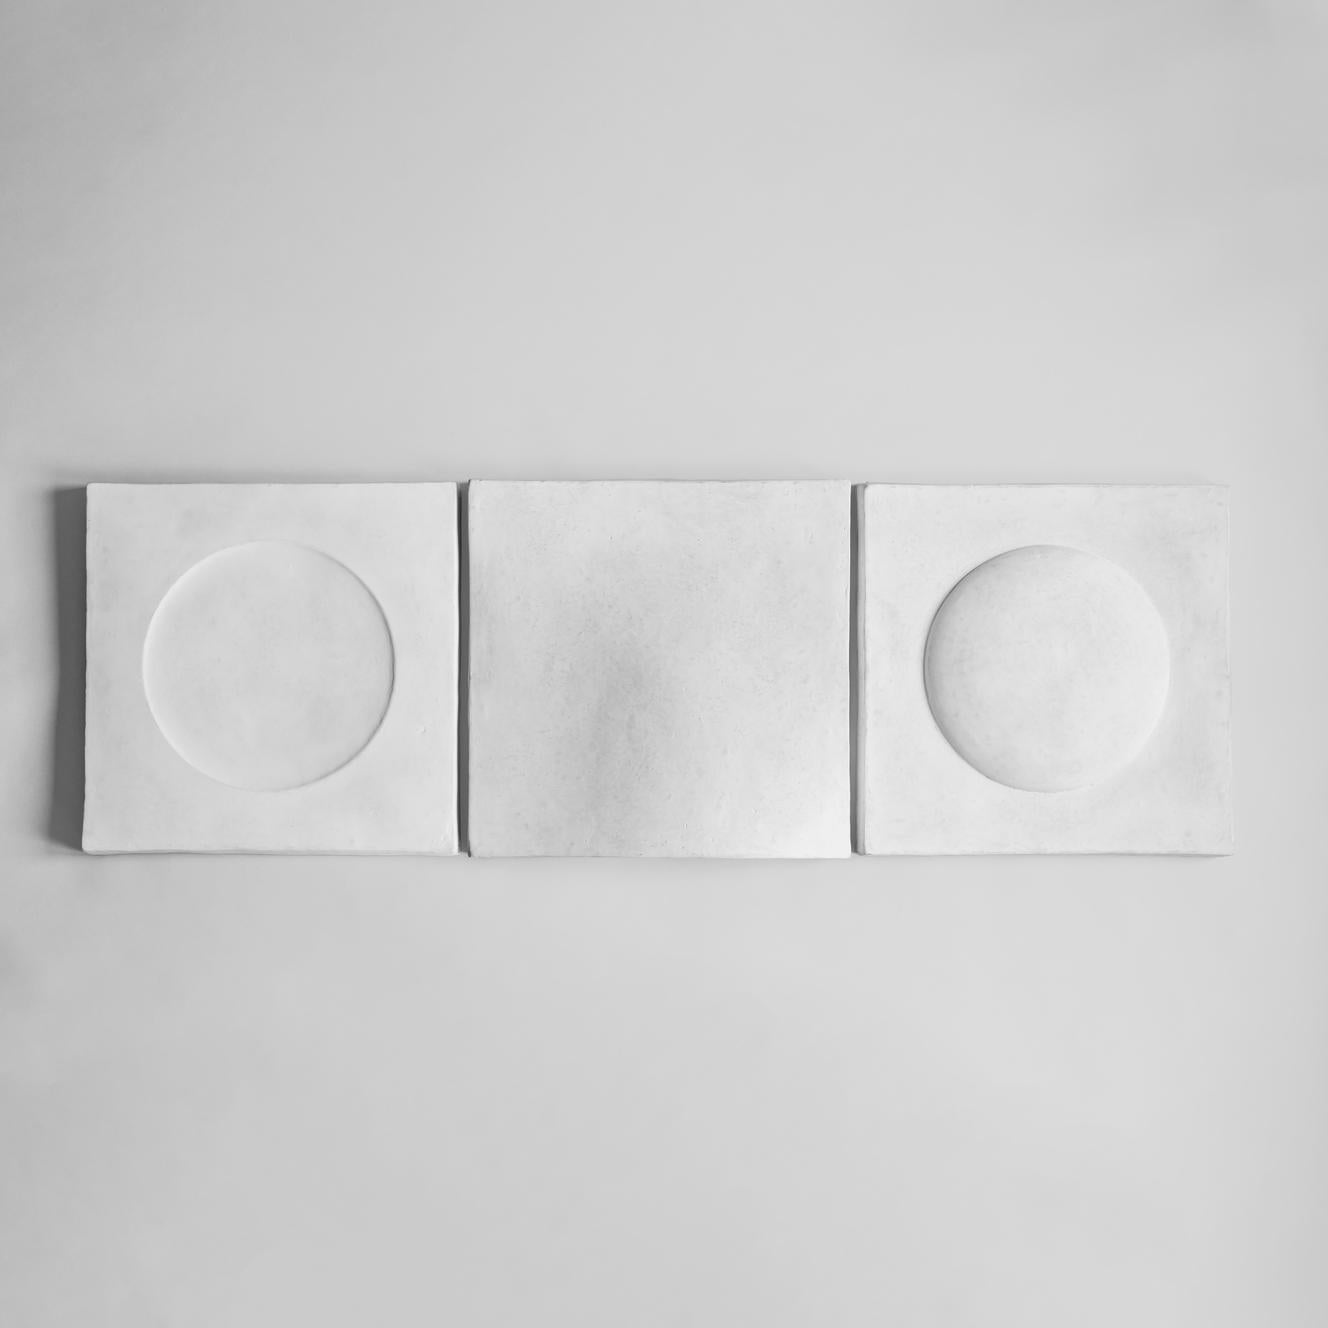 White sculpt art shield by 101 Copenhagen
Designed by Kristian Sofus Hansen & Tommy Hyldahl
Dimensions: L58 / W6 / H58 CM
Materials: sustainable paper mass

Sculp wall art questions the idea of traditional wall pictures, in the search for a new